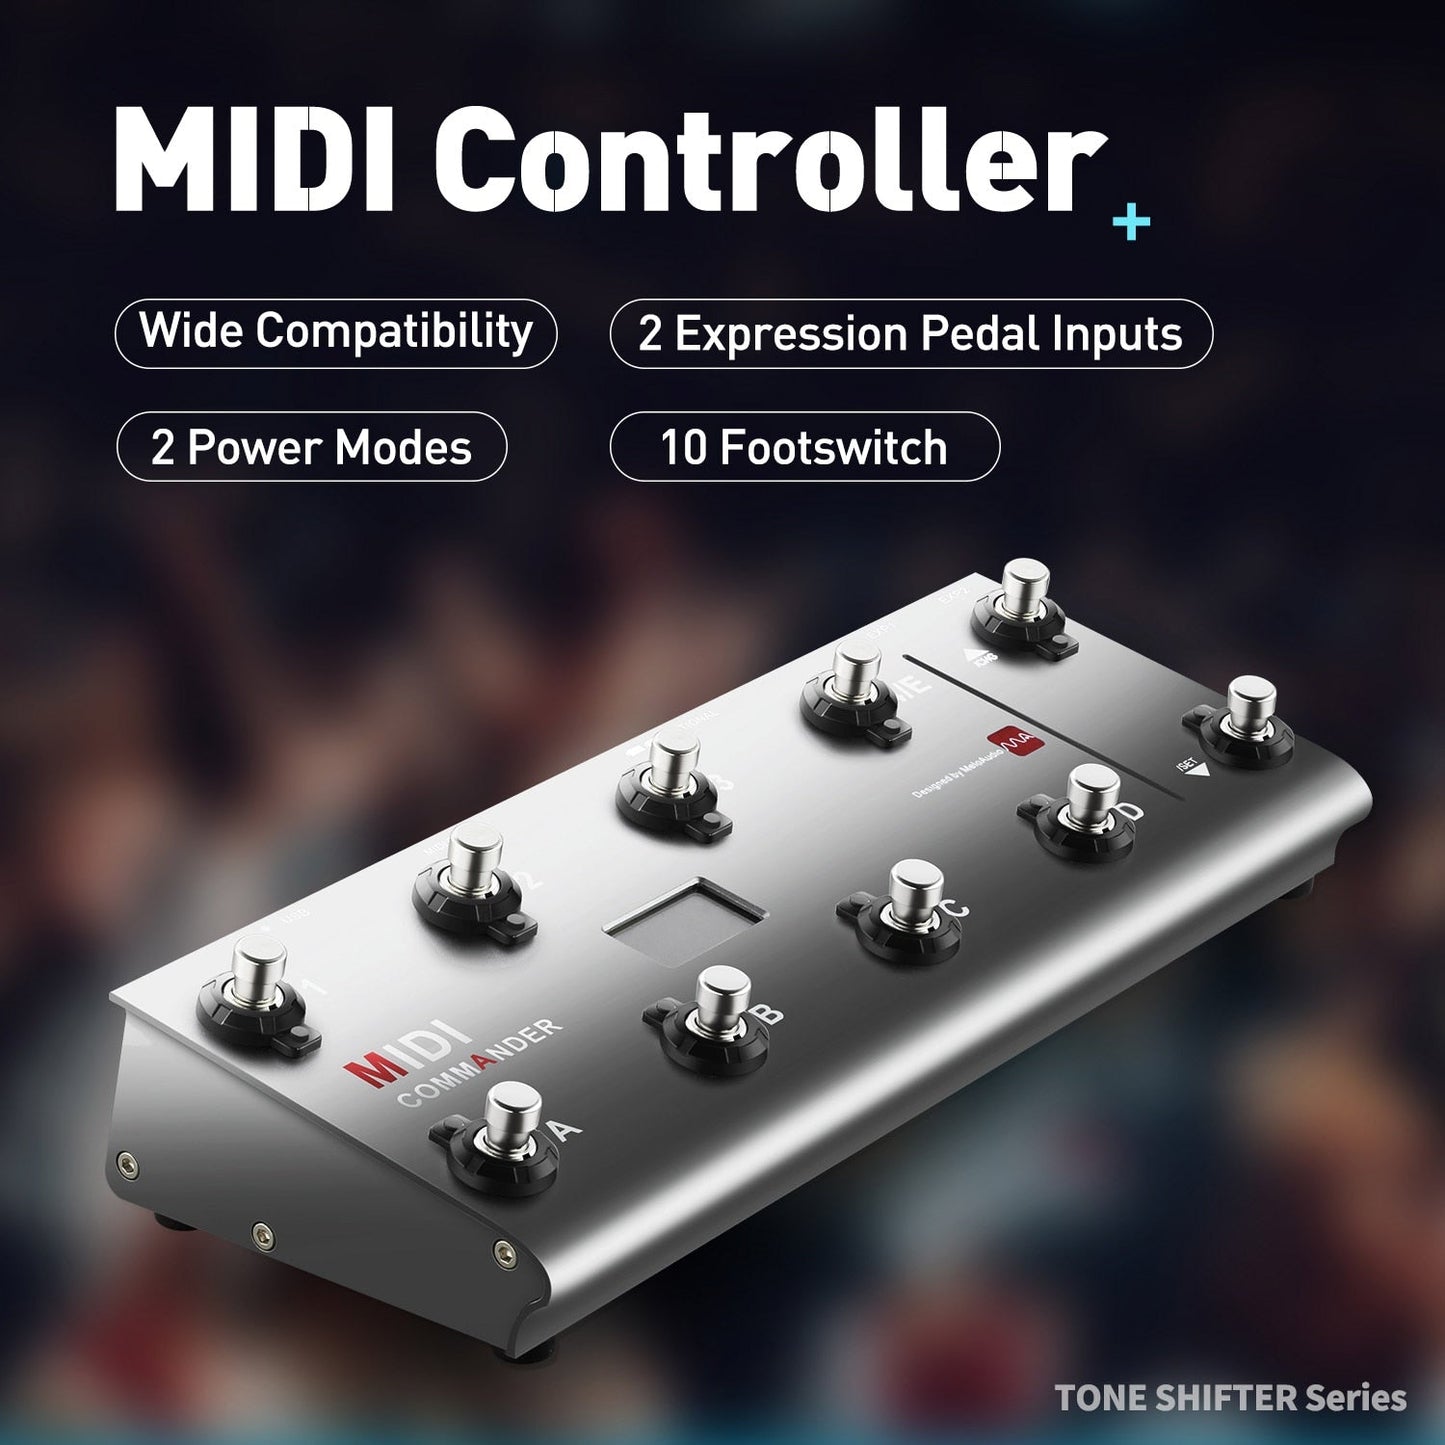 MIDI Commander Guitar Portable USB MIDI Foot Controller With 10 Foot Switches 2 Expression Pedal Jacks 8 Host Presets For Live